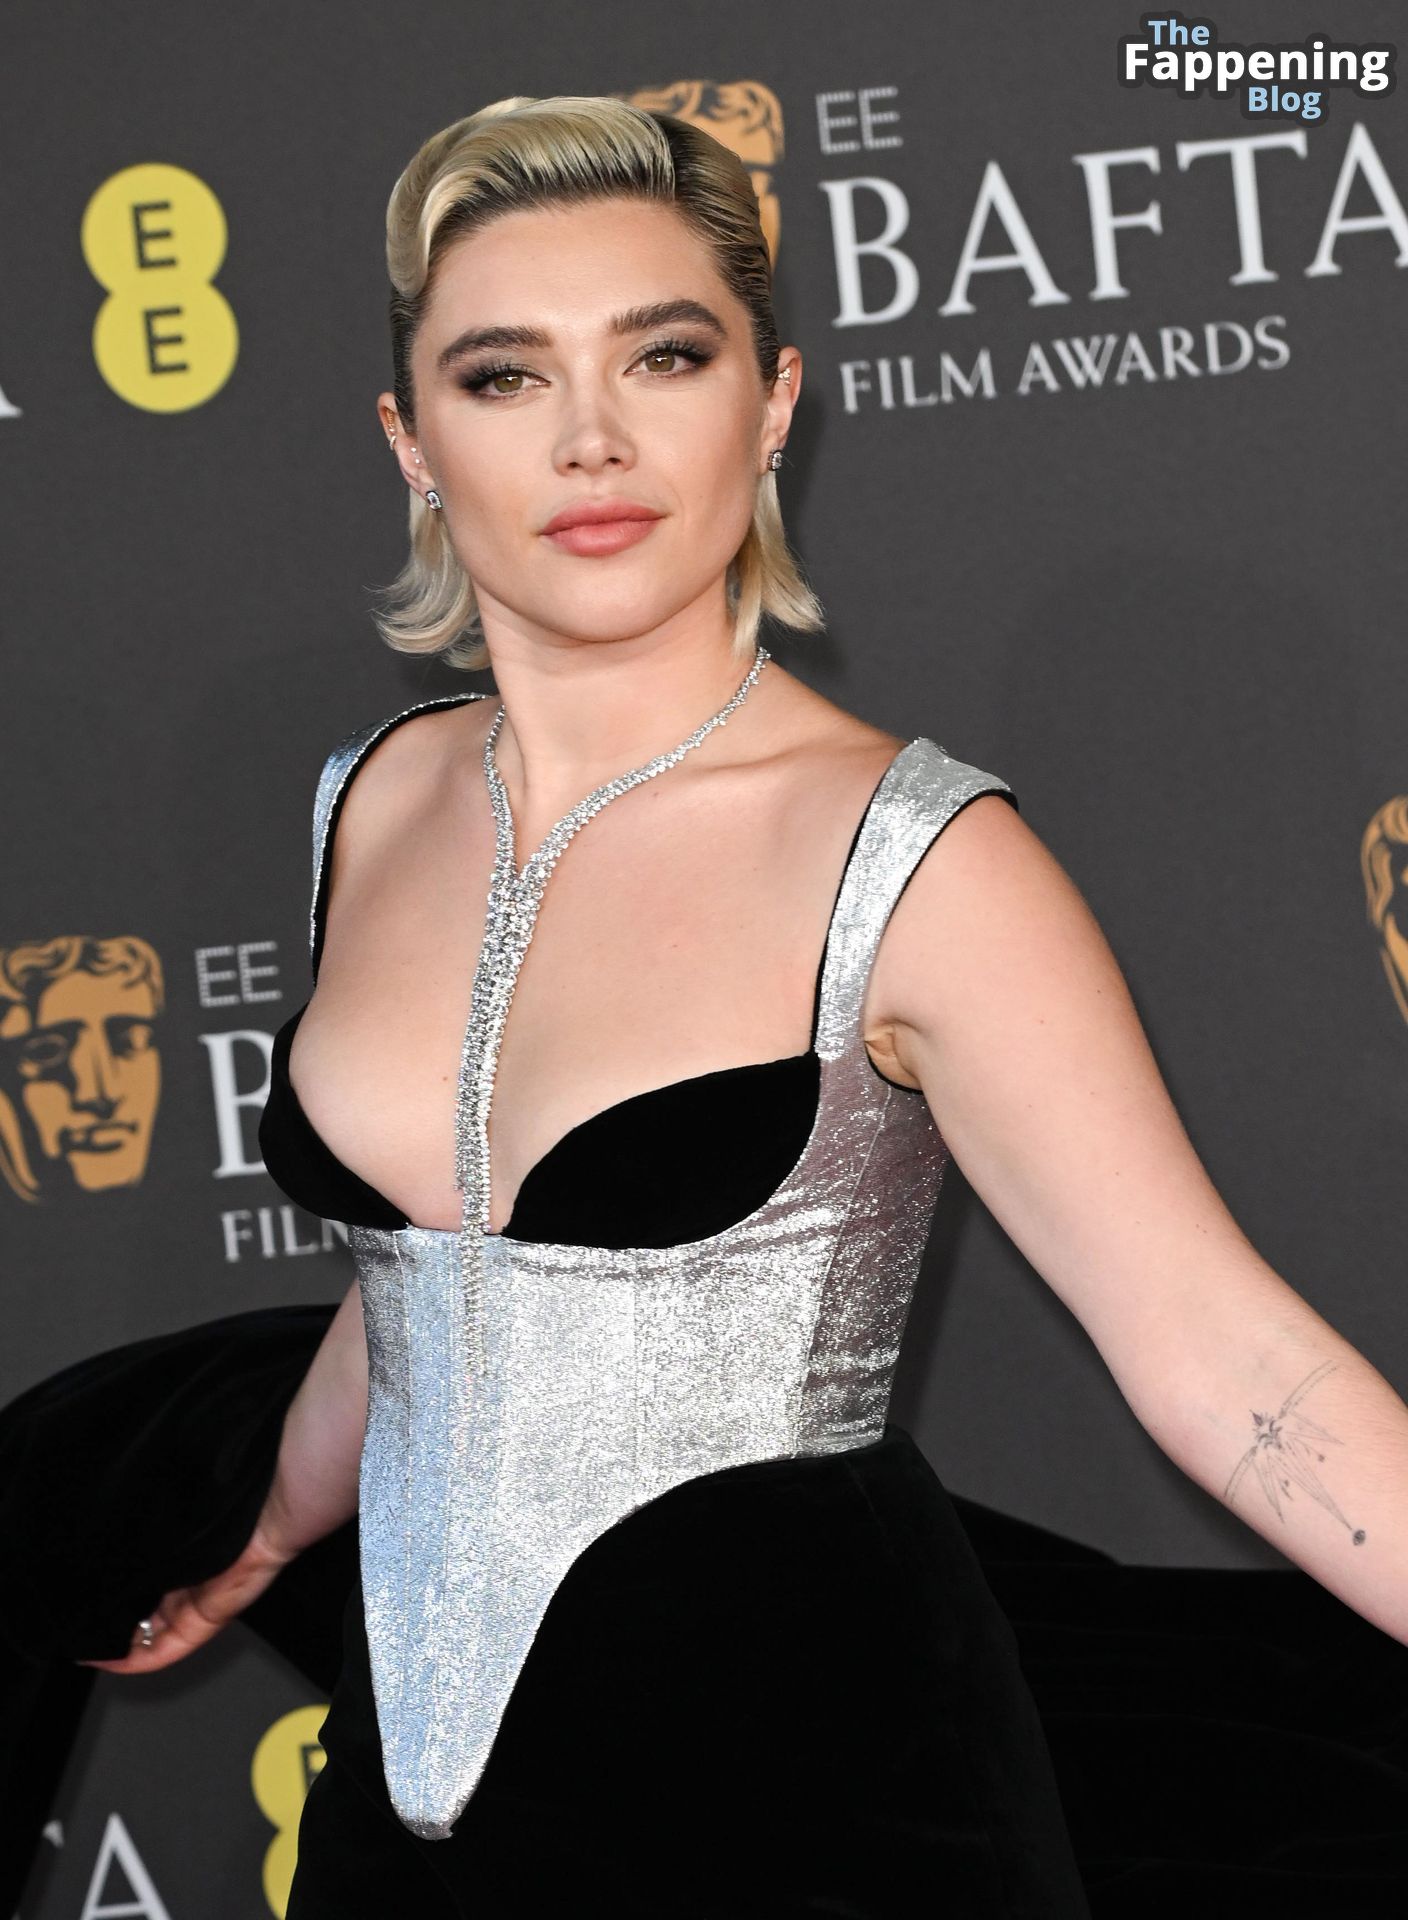 Florence-Pugh-Sexy-54-The-Fappening-Blog-1.jpg